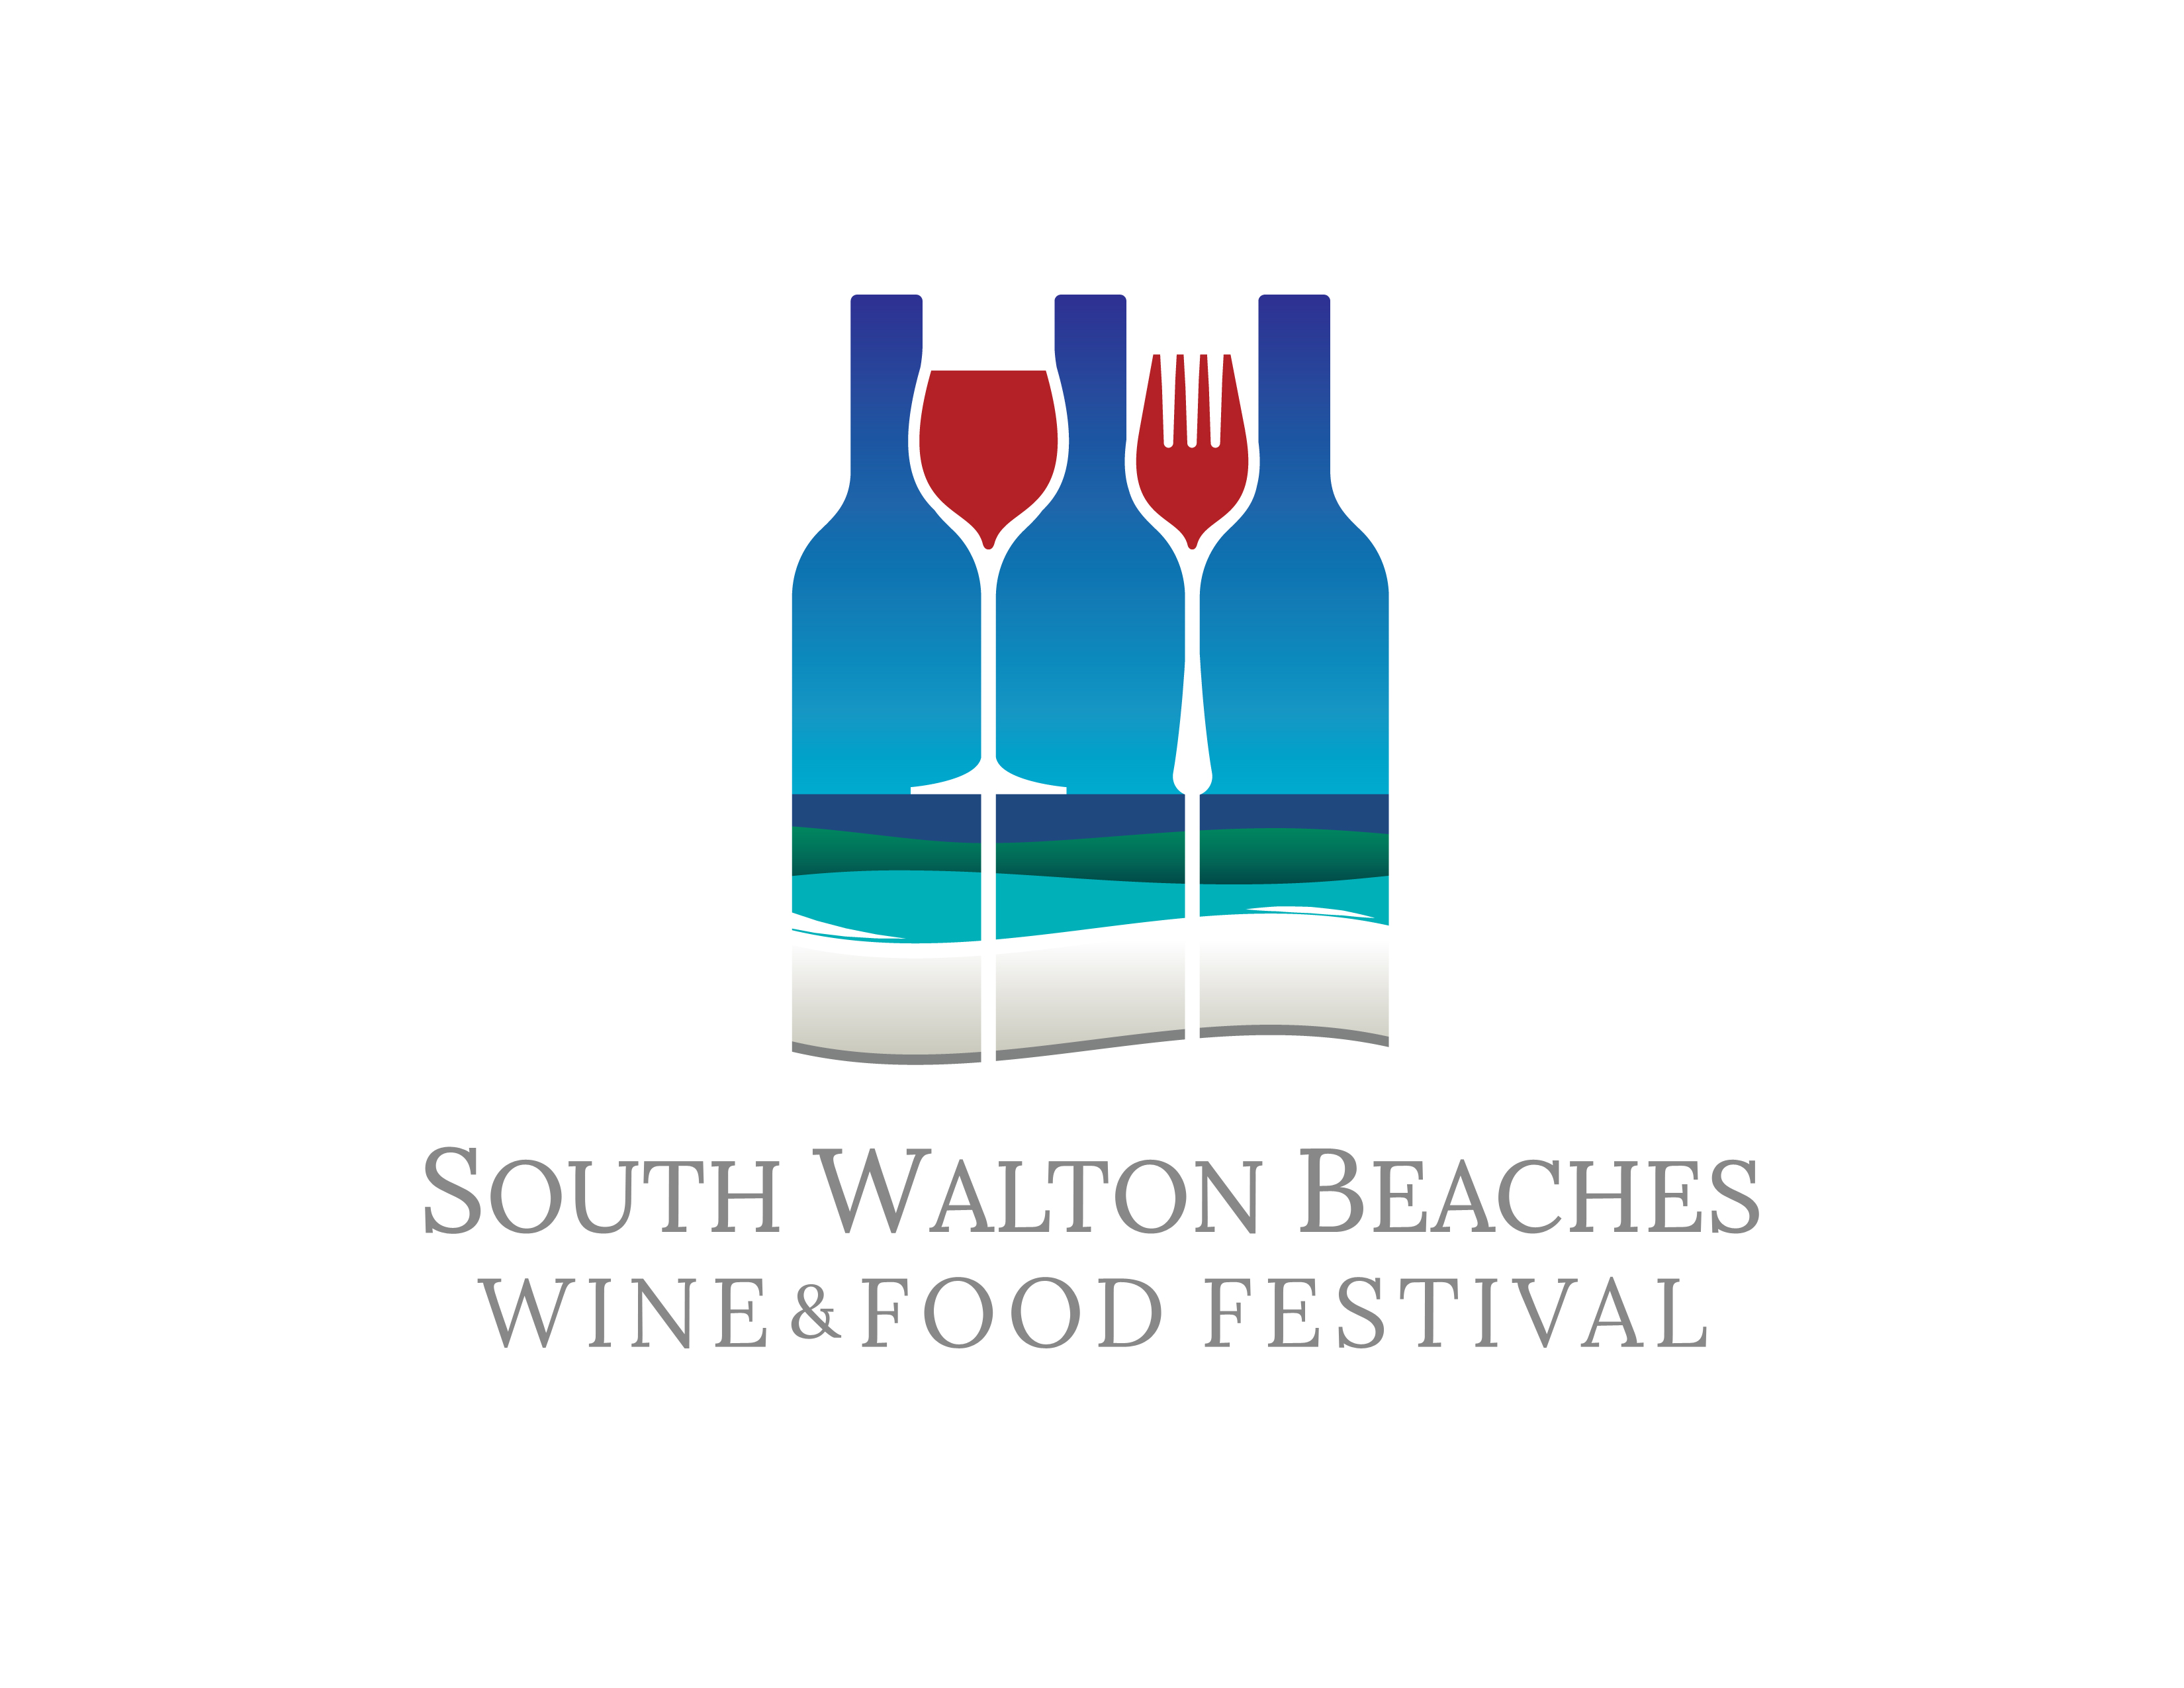 South Walton Beaches Wine and Food Festival takes place April 23 - 26 in Grand Boulevard at Sandestin.